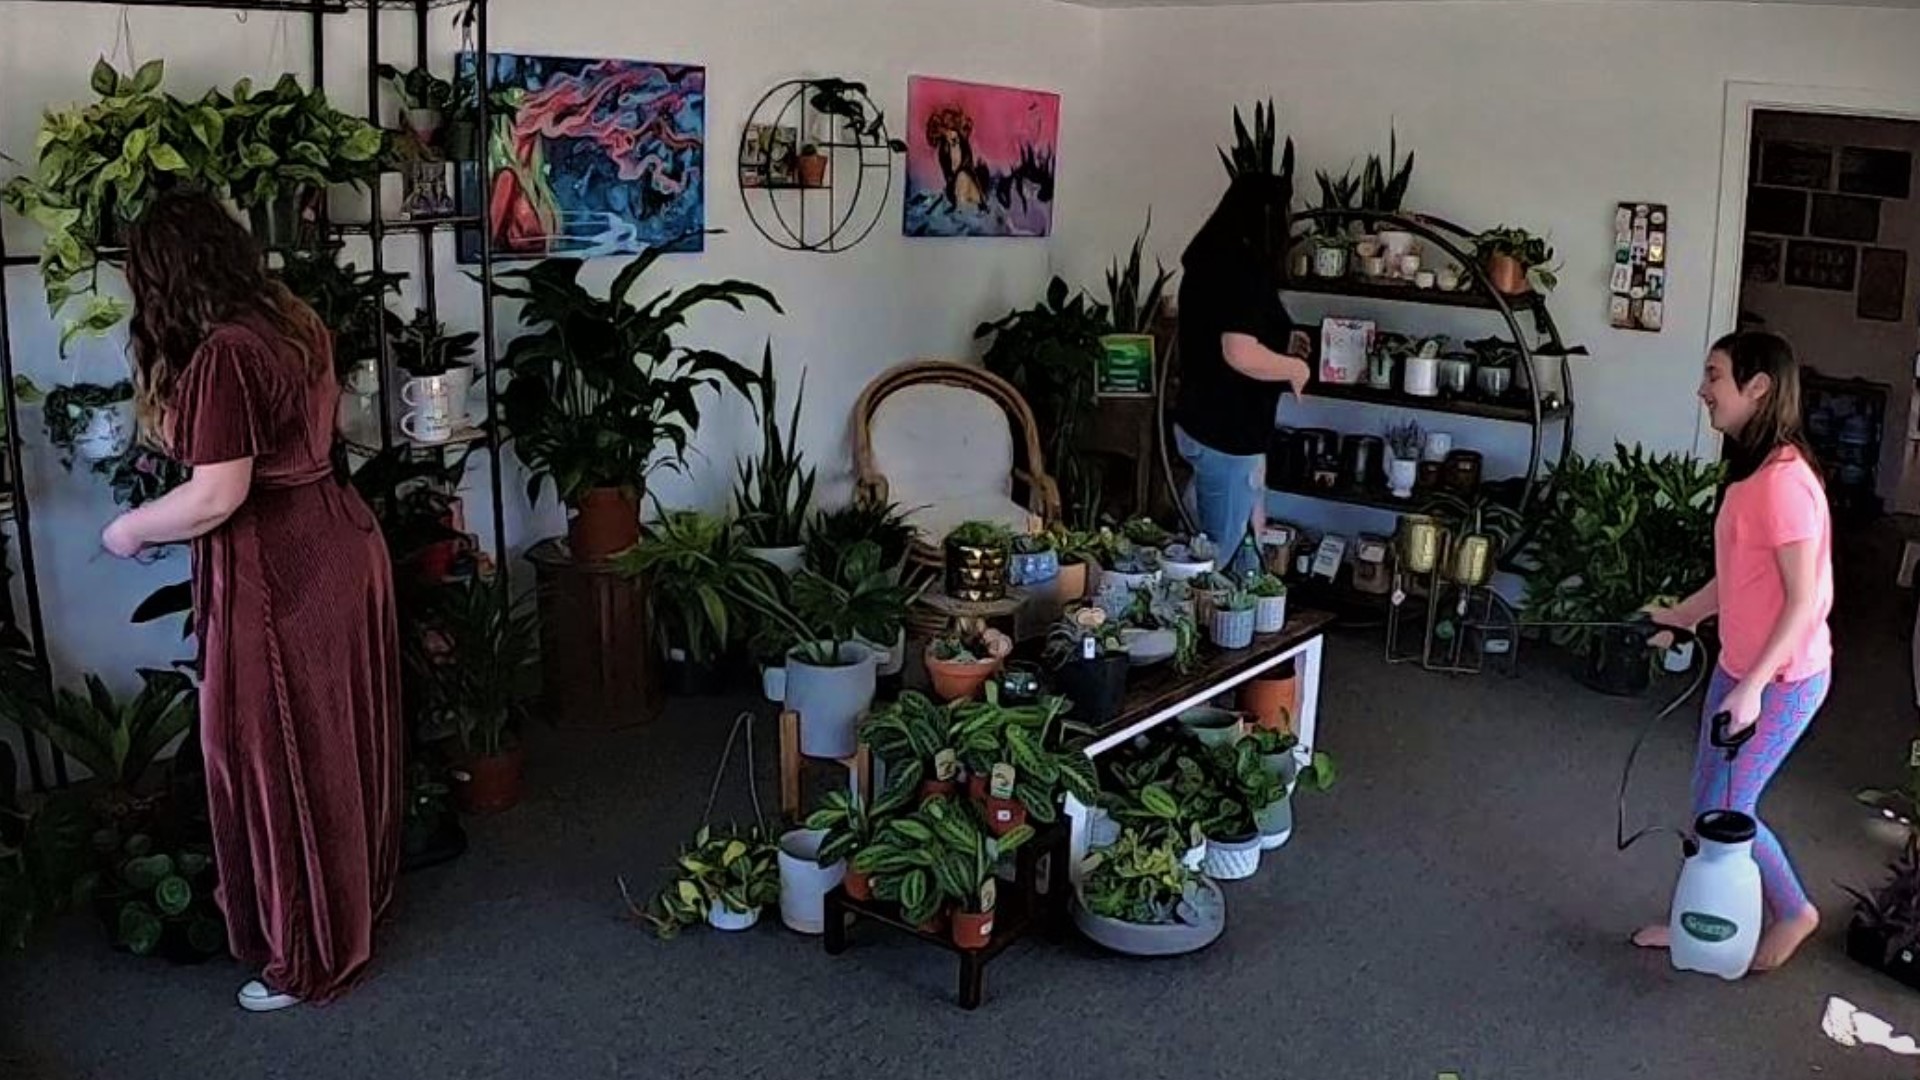 ReRooted has grown from a single succulent arrangement made by owner Krissy Brown to a small storefront. #k5evening